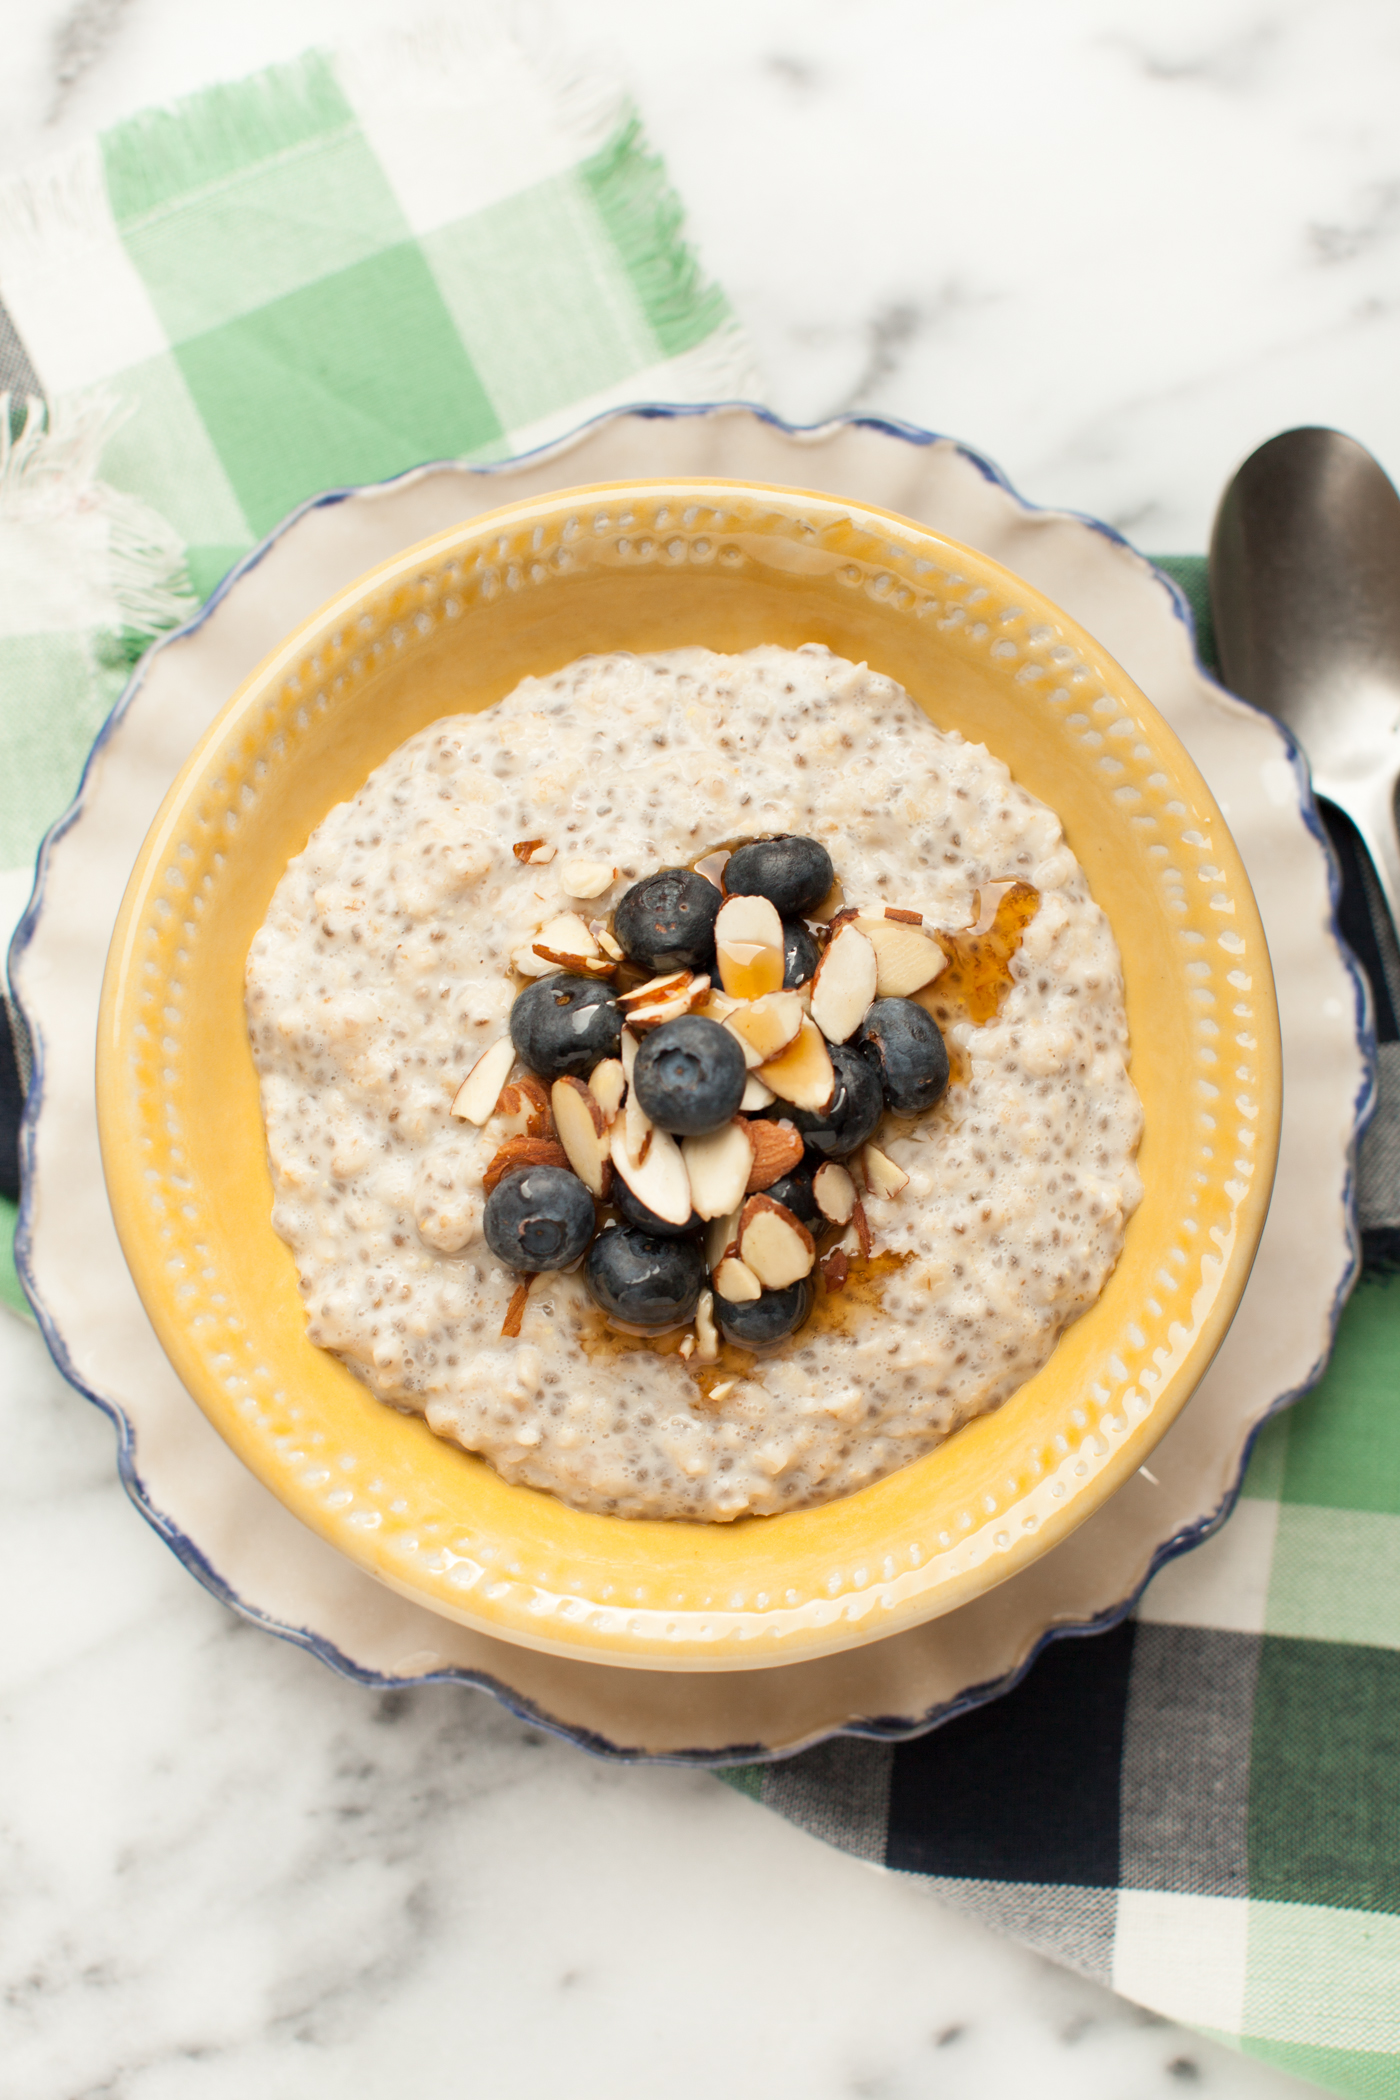 Warm Chia and Oat Pudding